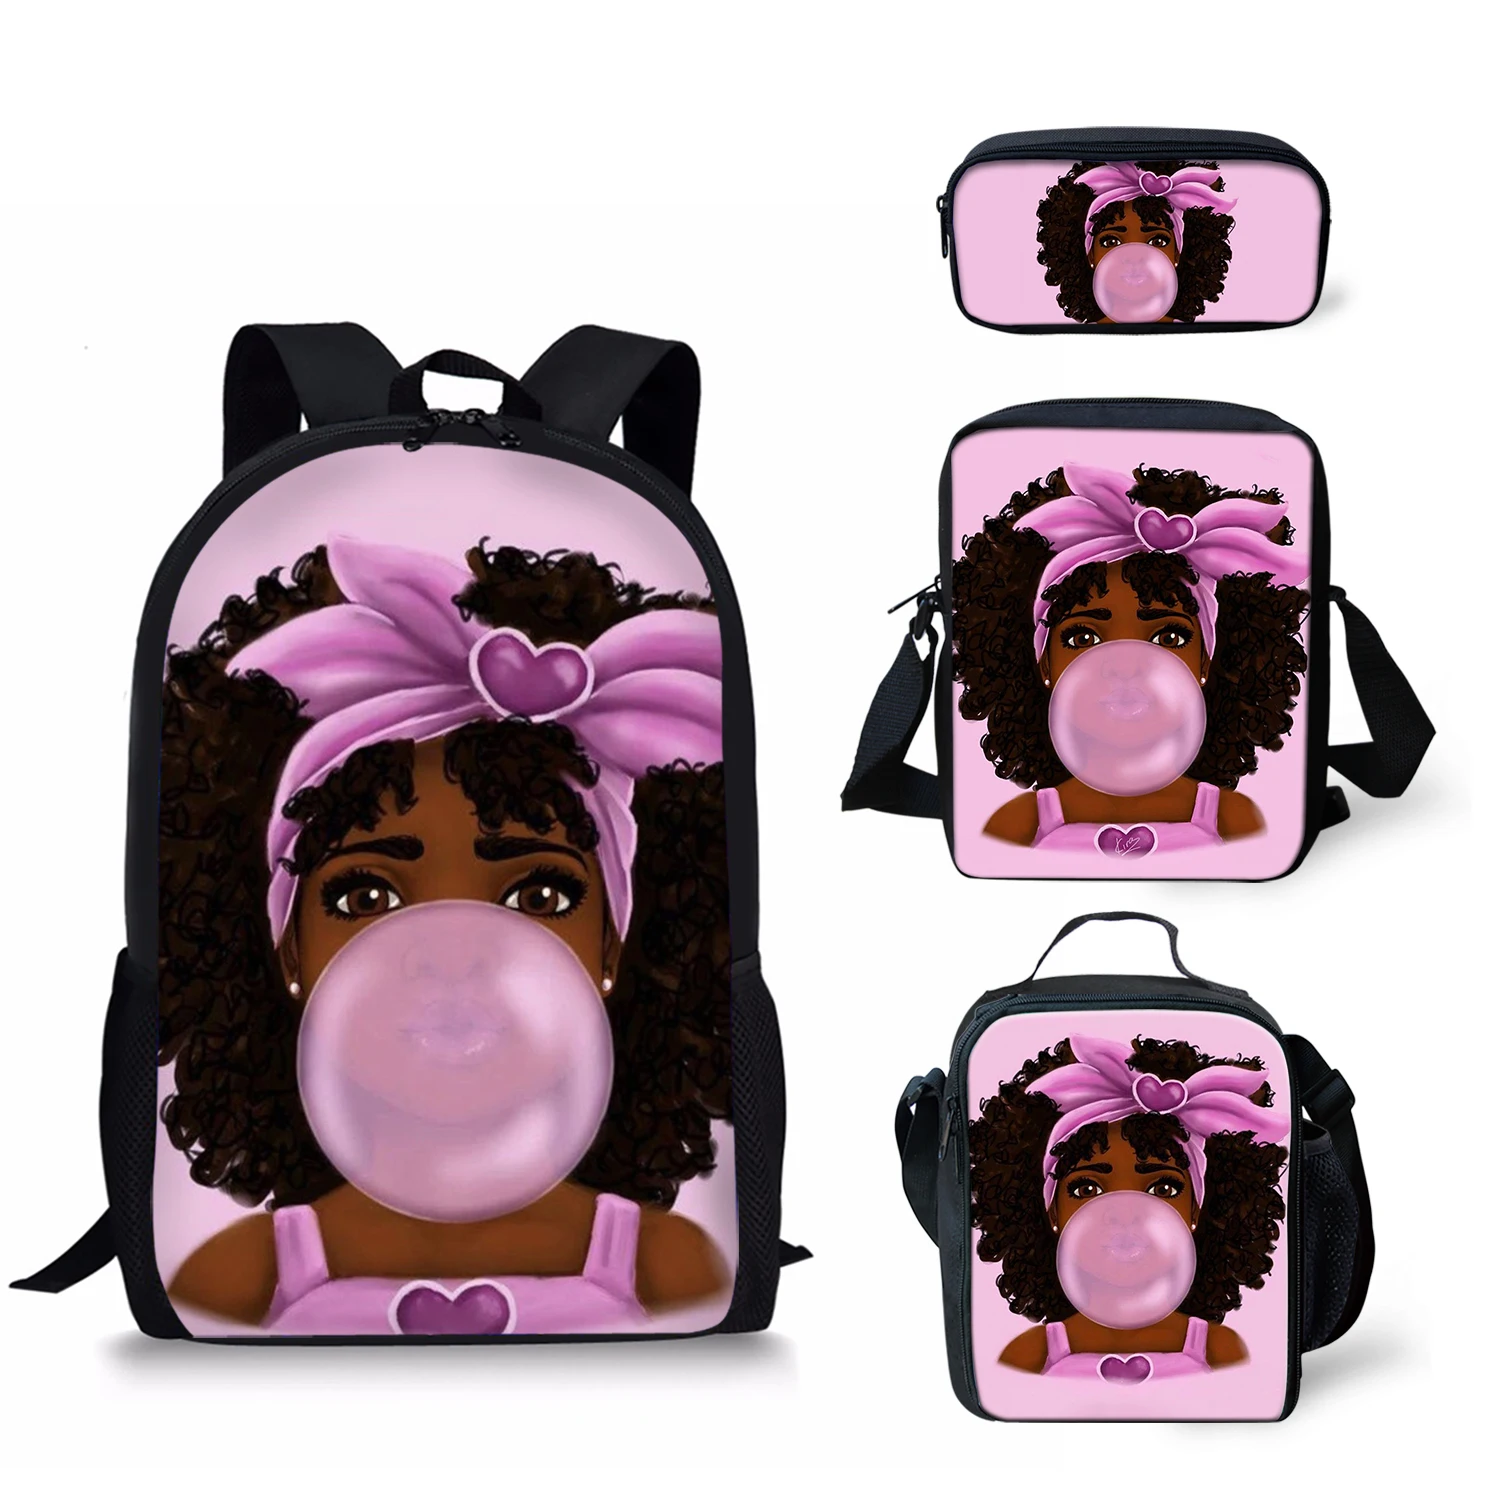 2022 Hot Deals African Girl Pattern 4Pcs/Set School Bags Customized Students Satchel Premium Children's Backpack Free Shipping